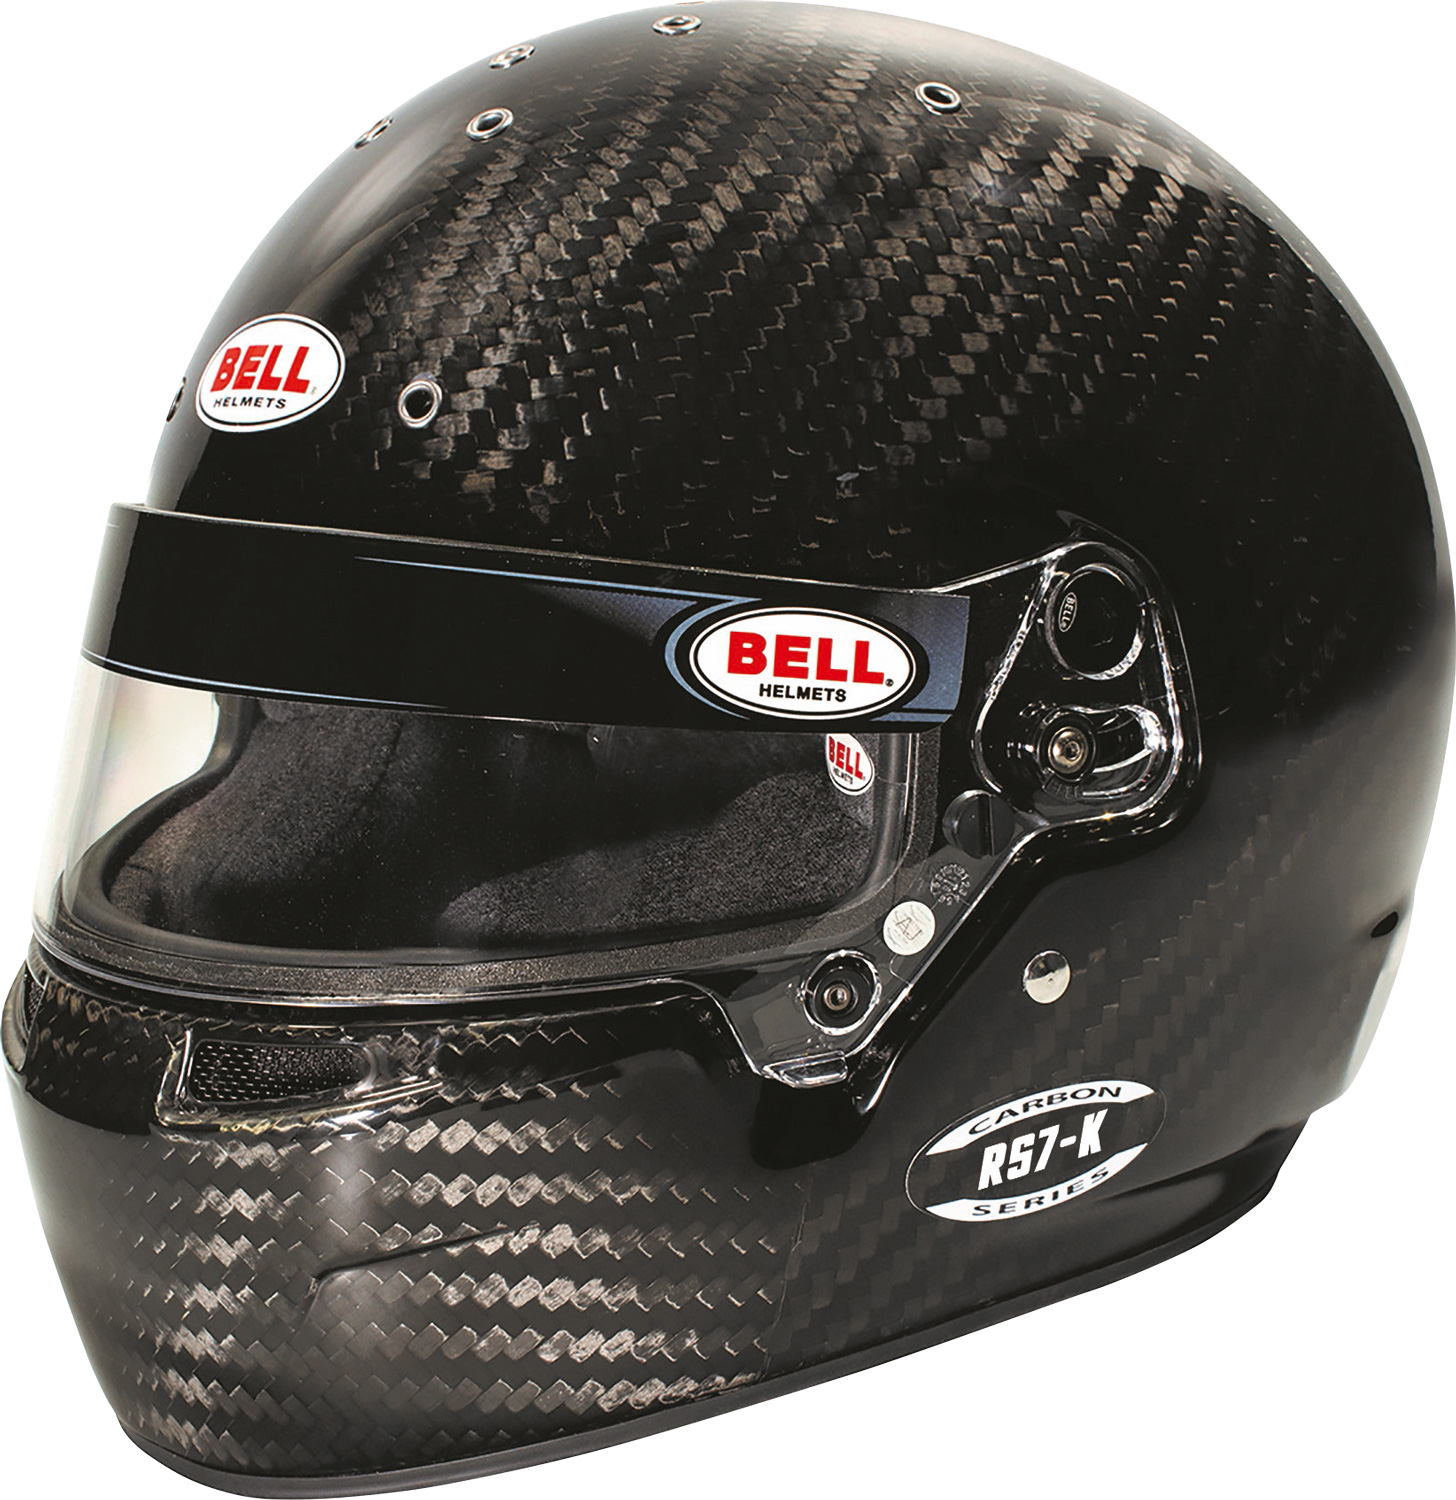 BELL Helm RS7-K Carbon